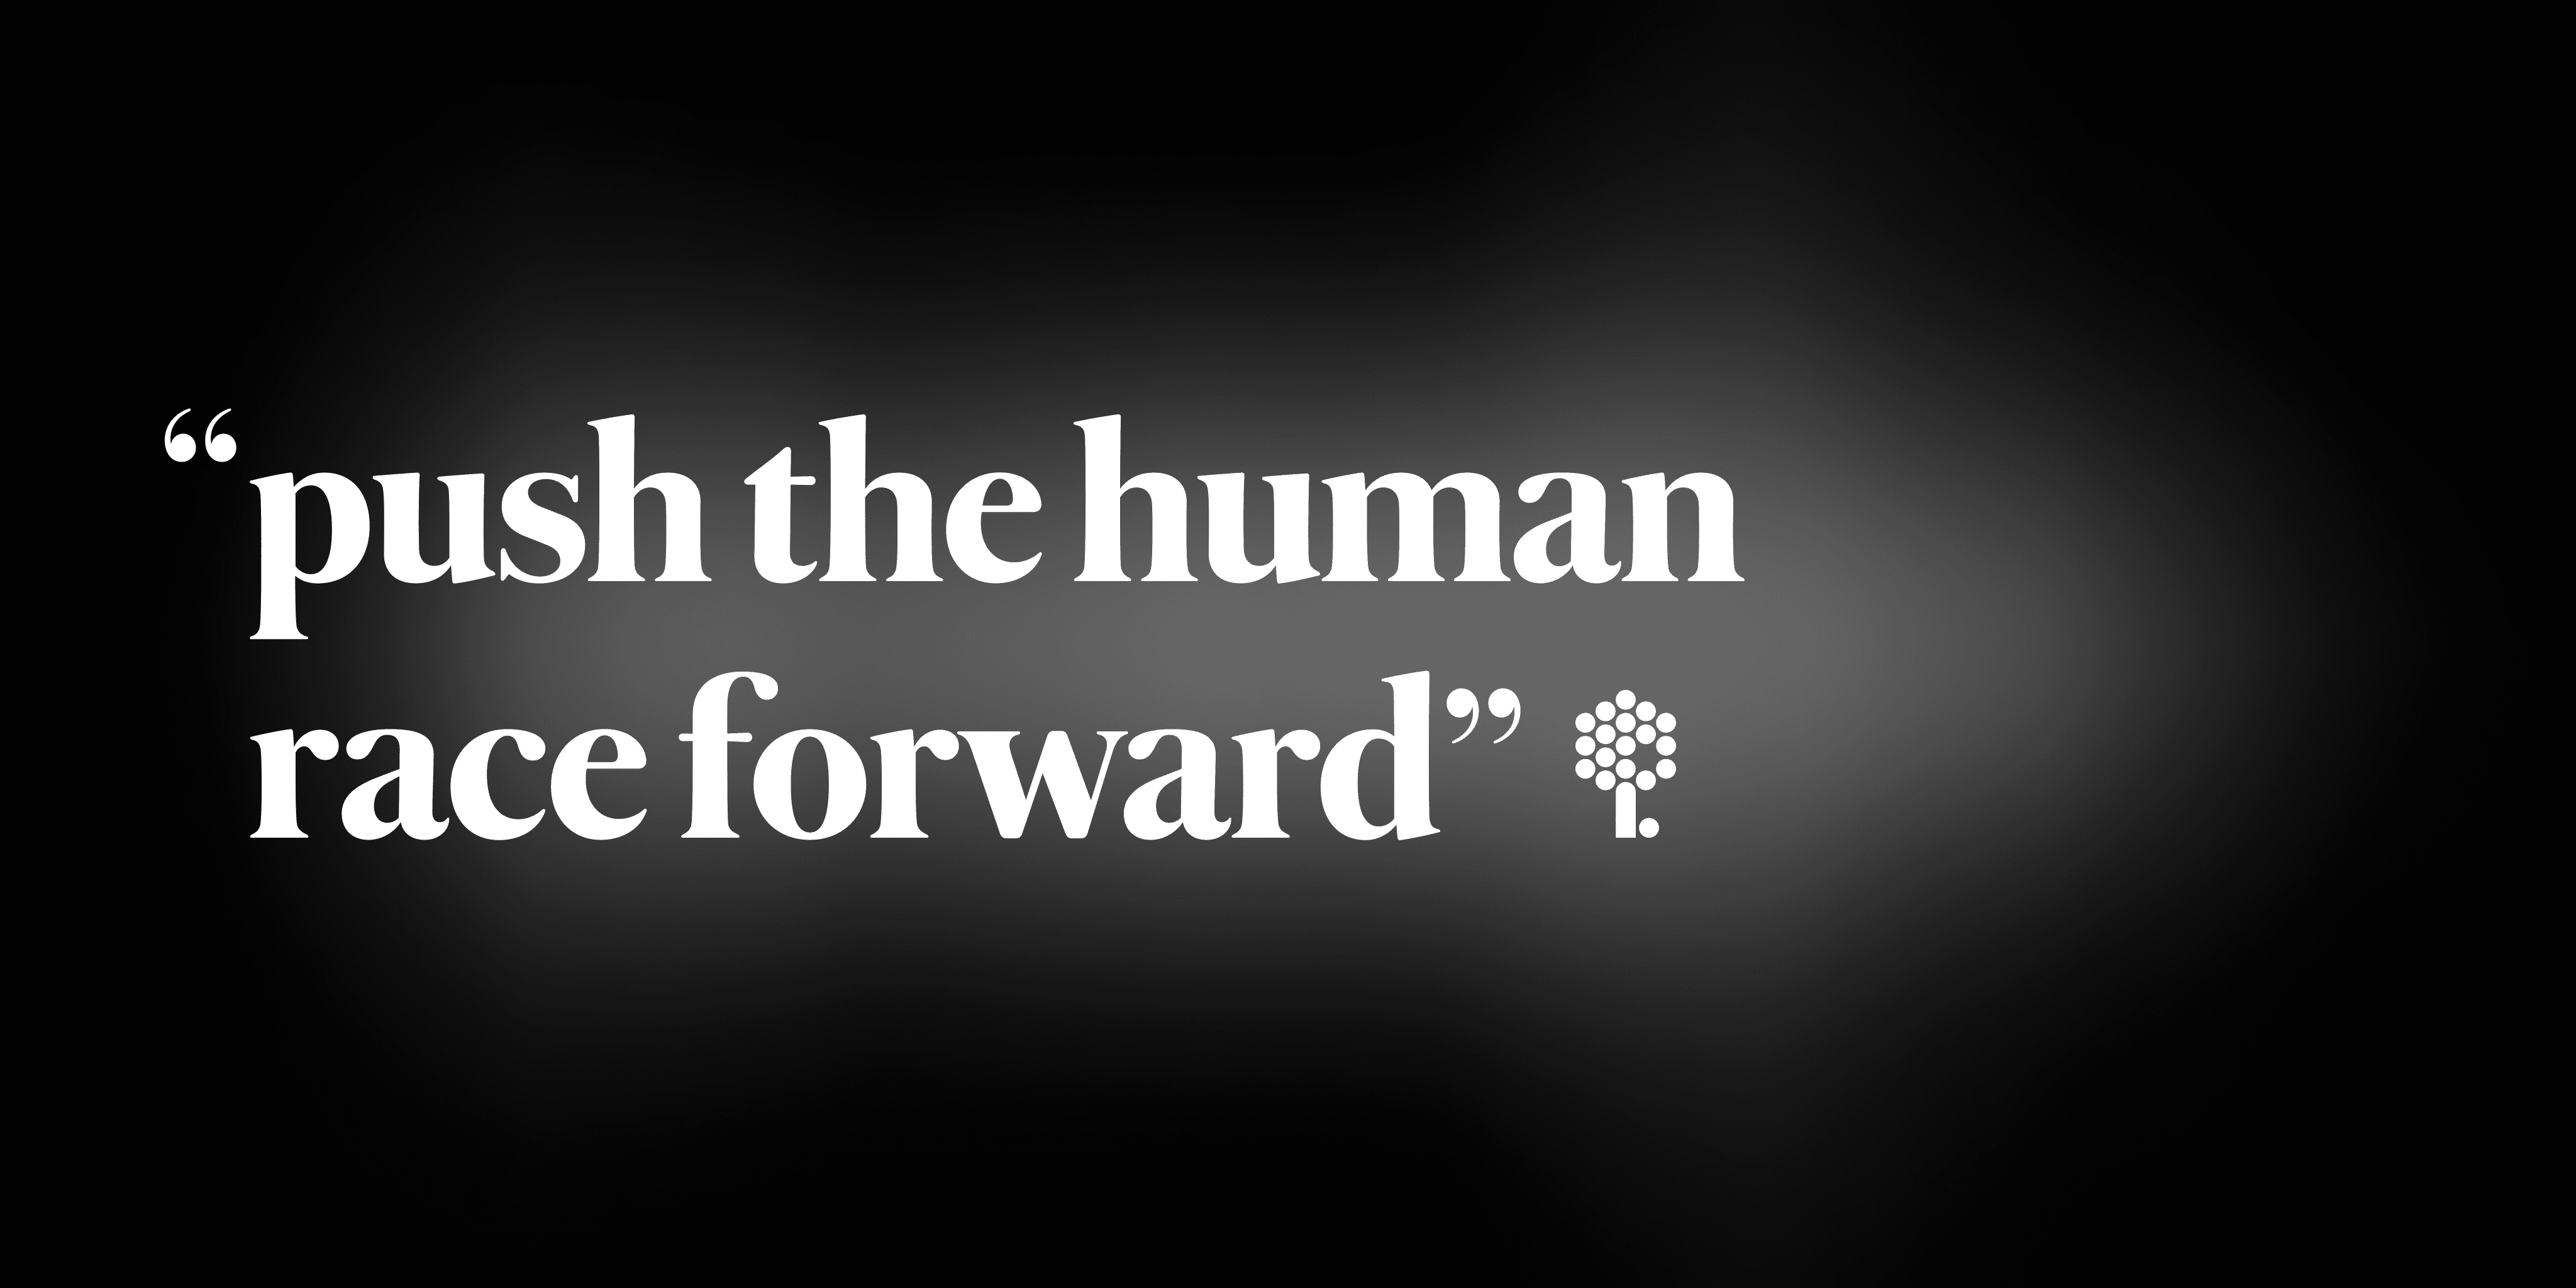 Think Different Campaign: "Push the human race forward" | Steve Jobs Archive